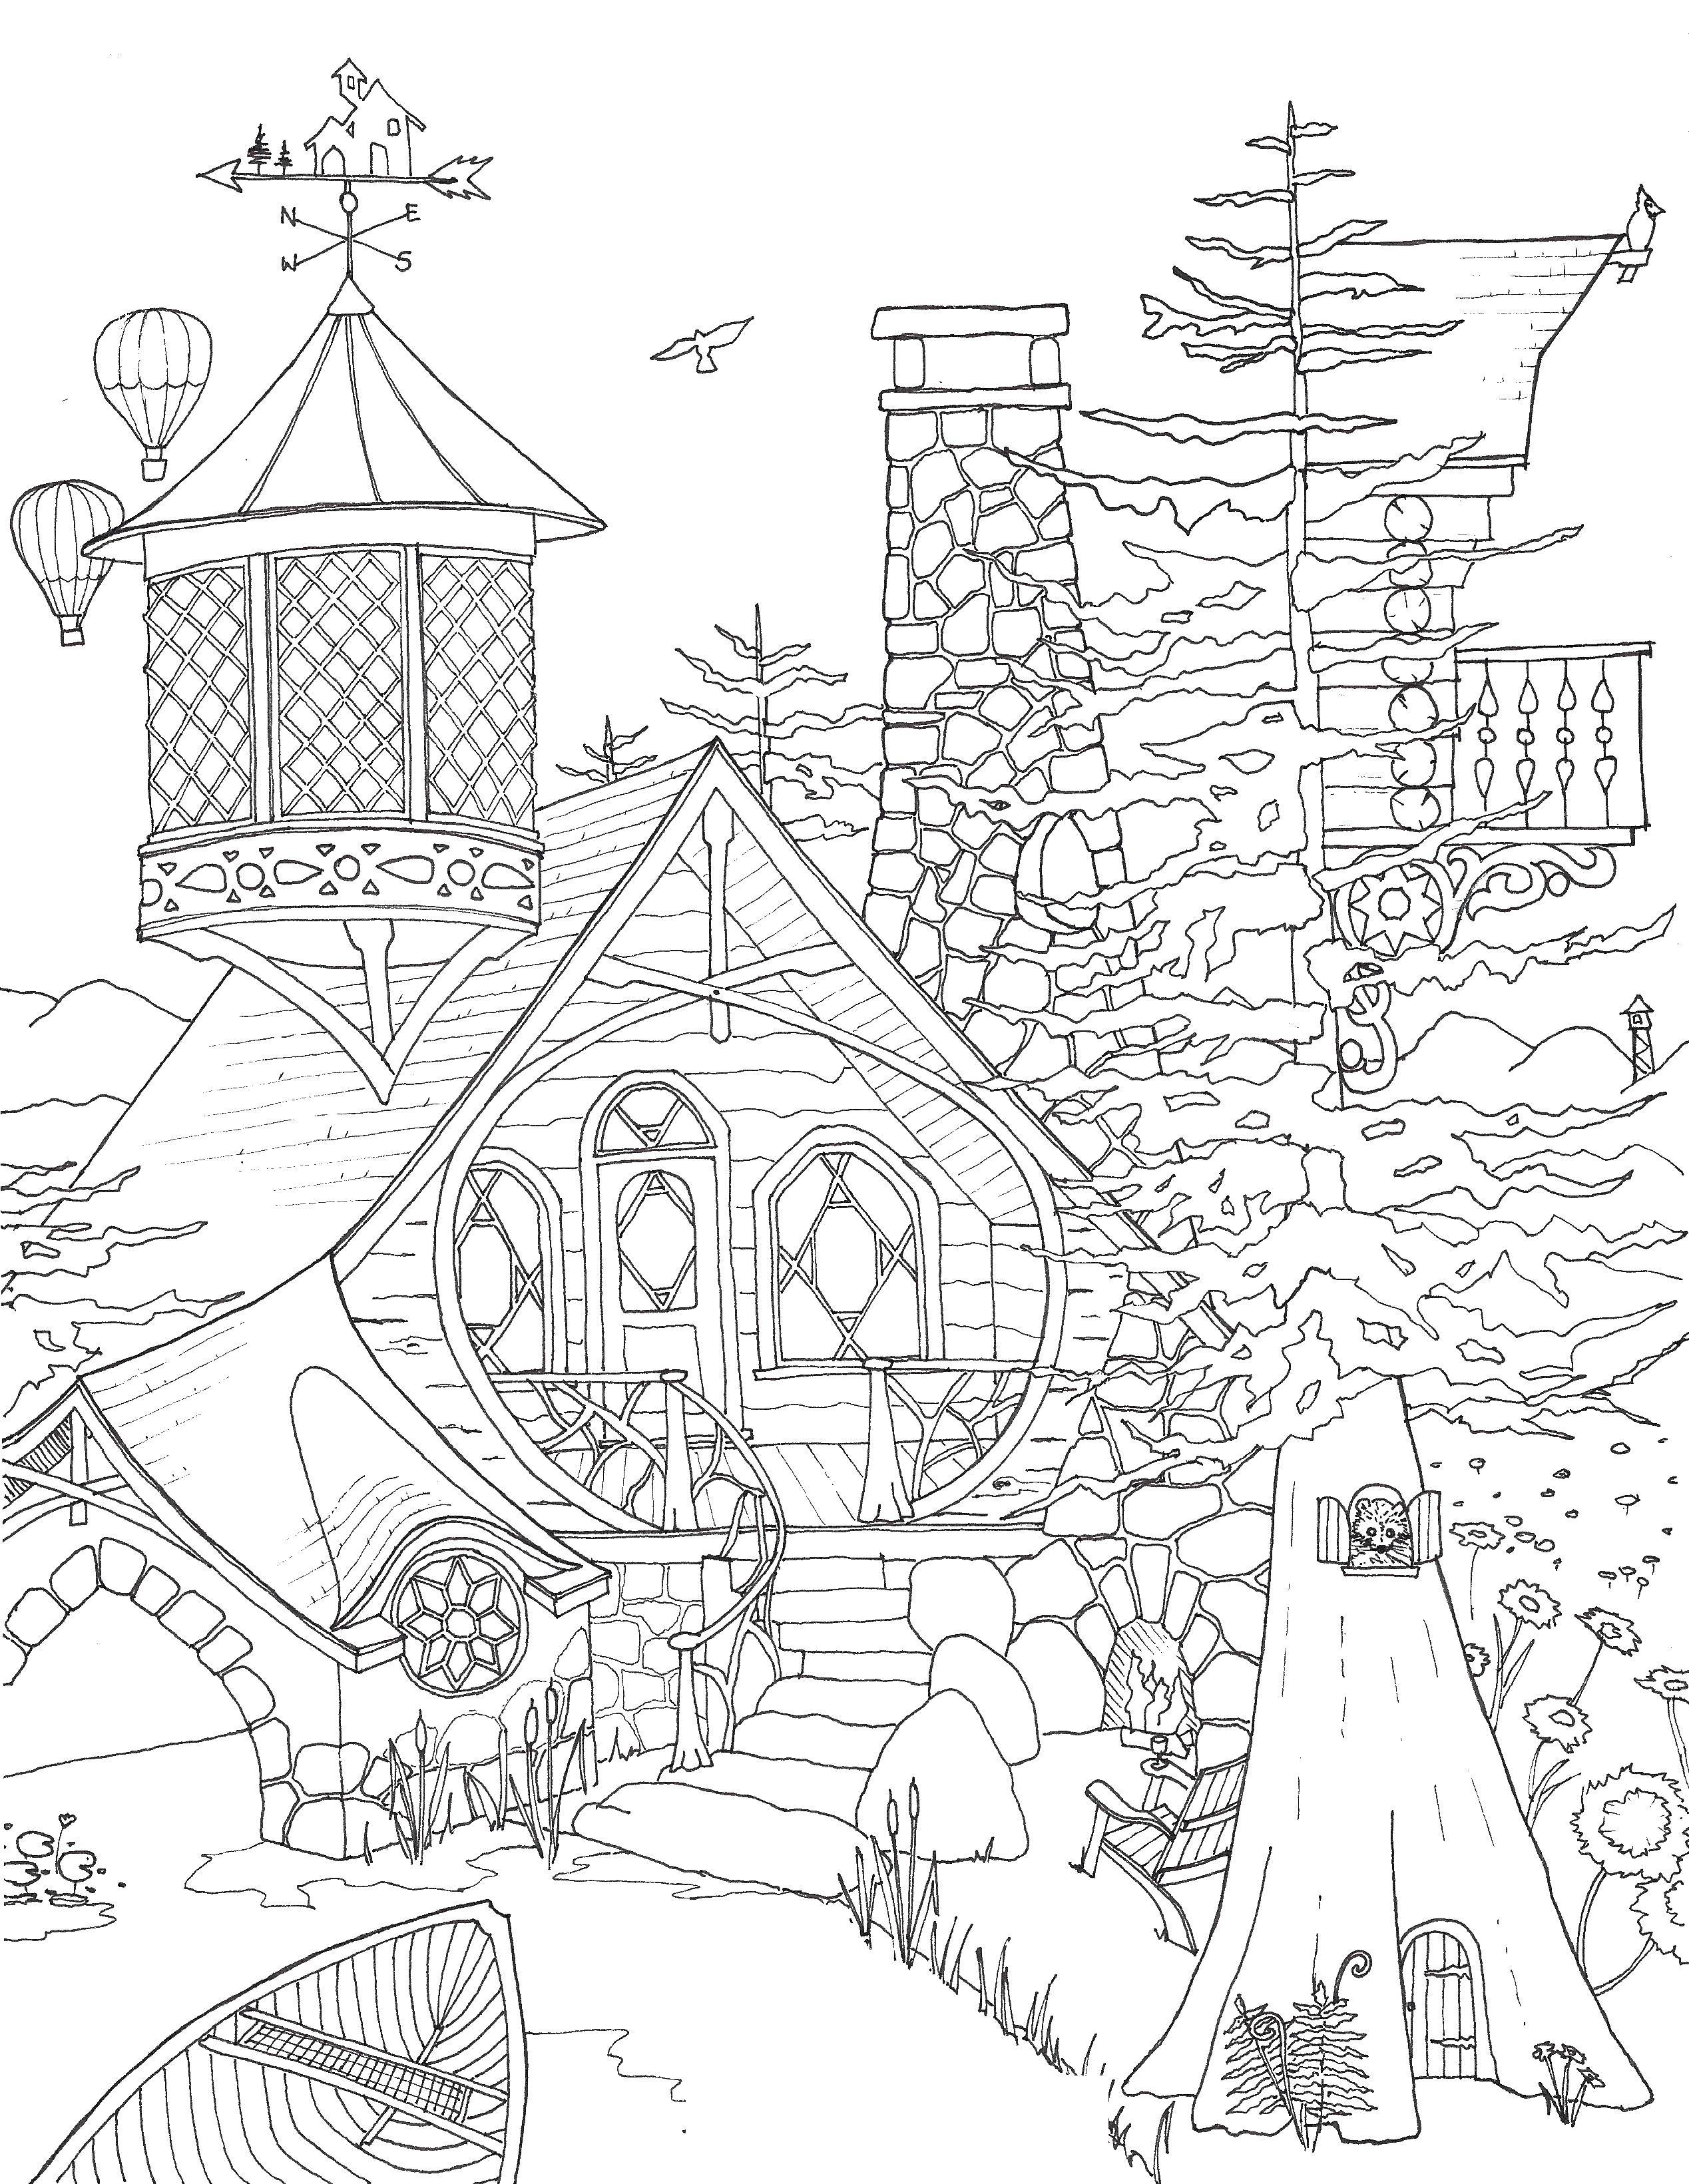 Coloring The cabin in the woods. Category home. Tags:  forest, house.